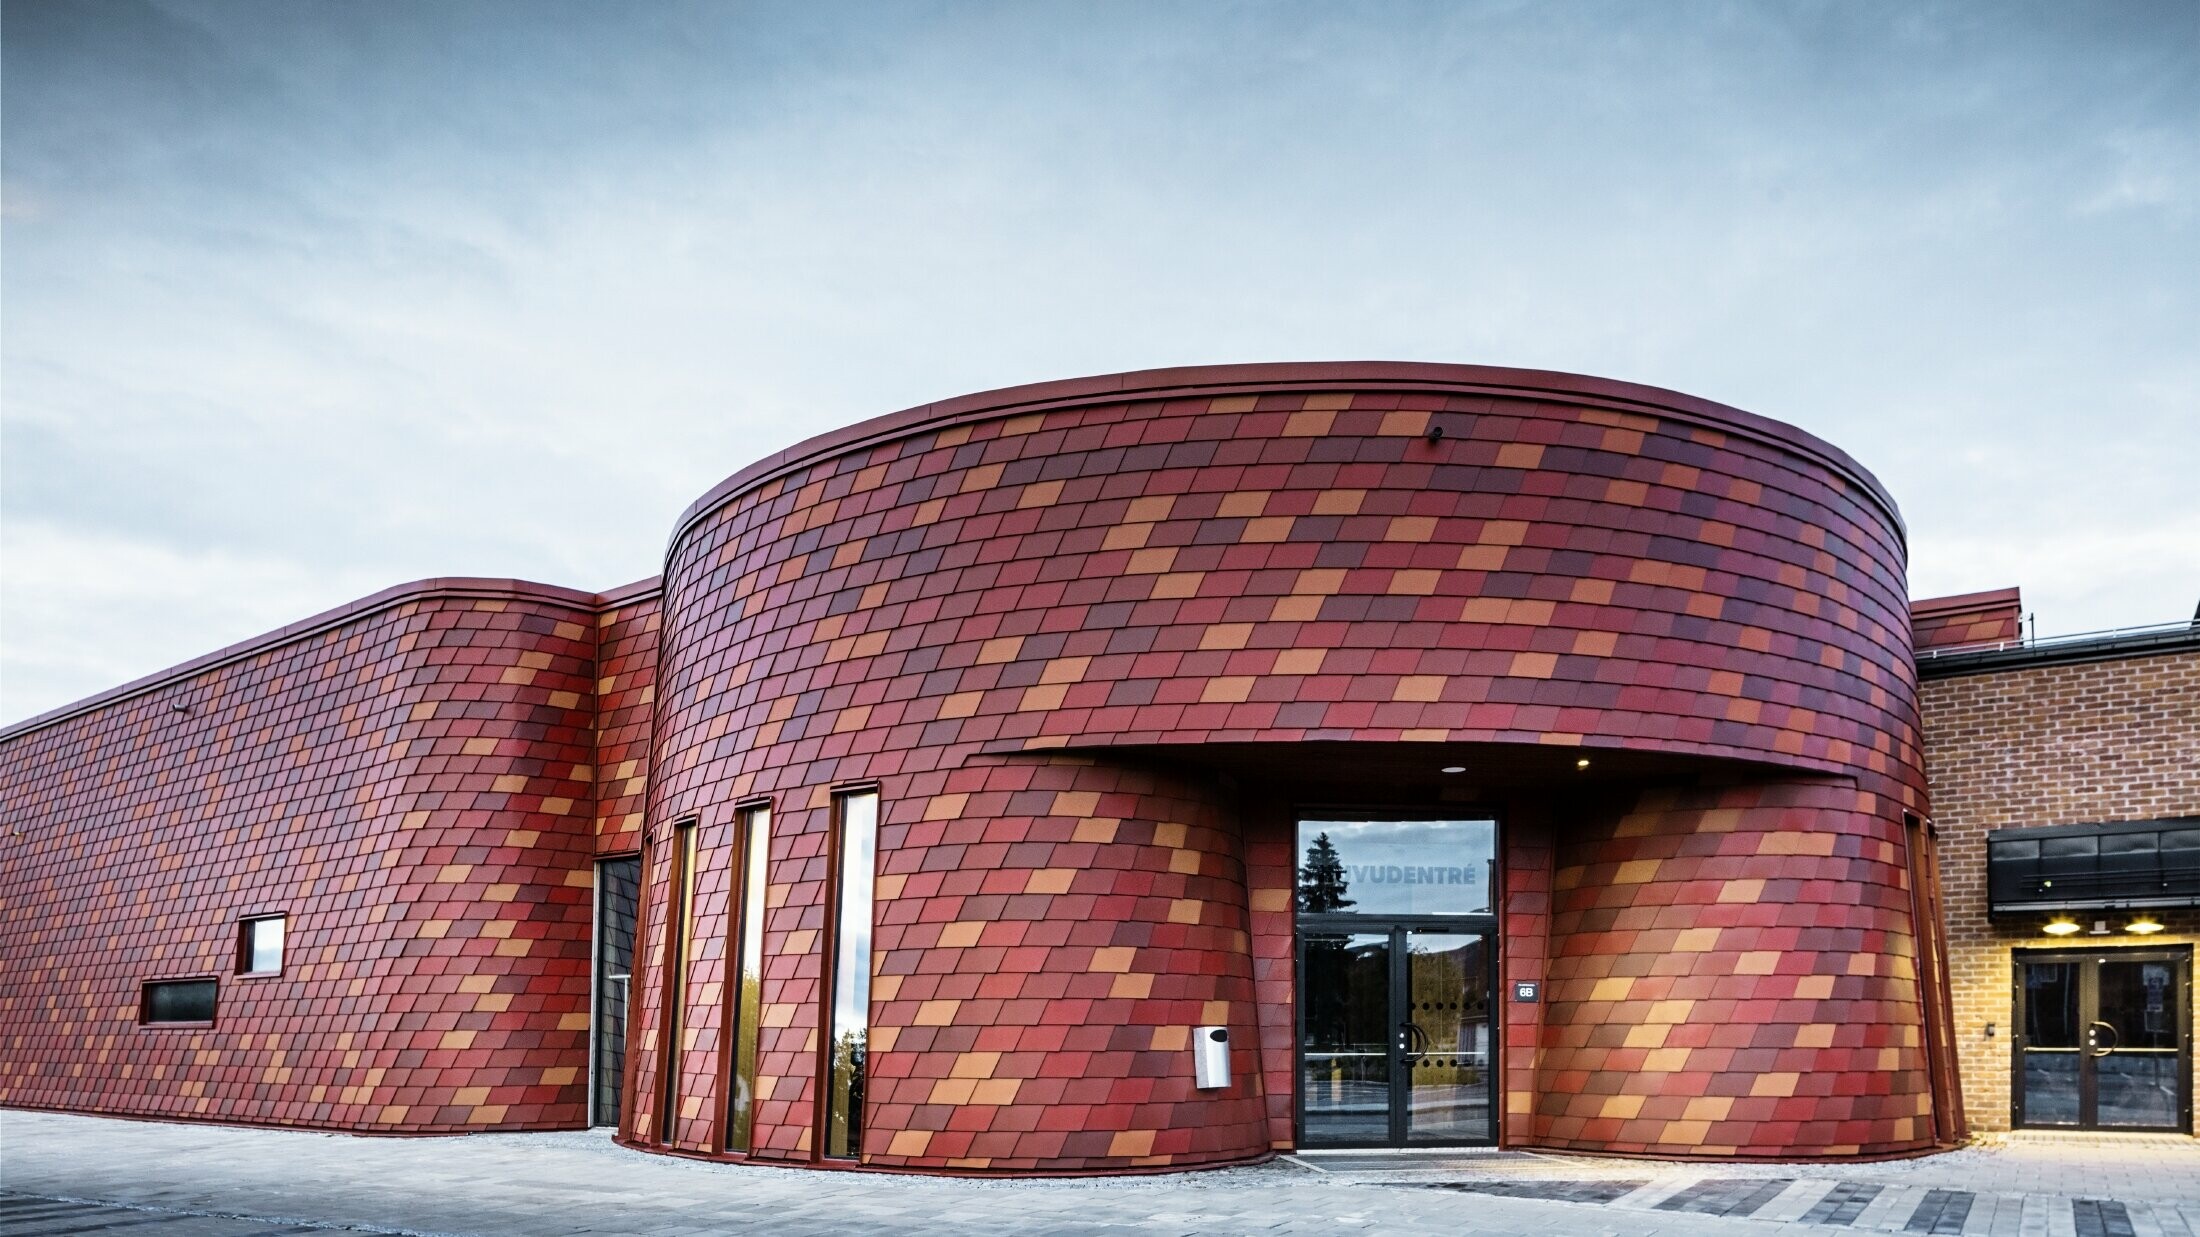 Ice rink with a flat roof and curved façade, the façade is clad with wall shingles made of aluminum from PREFA in different shades of red - oxide red, brick red, red-brown, brown-red